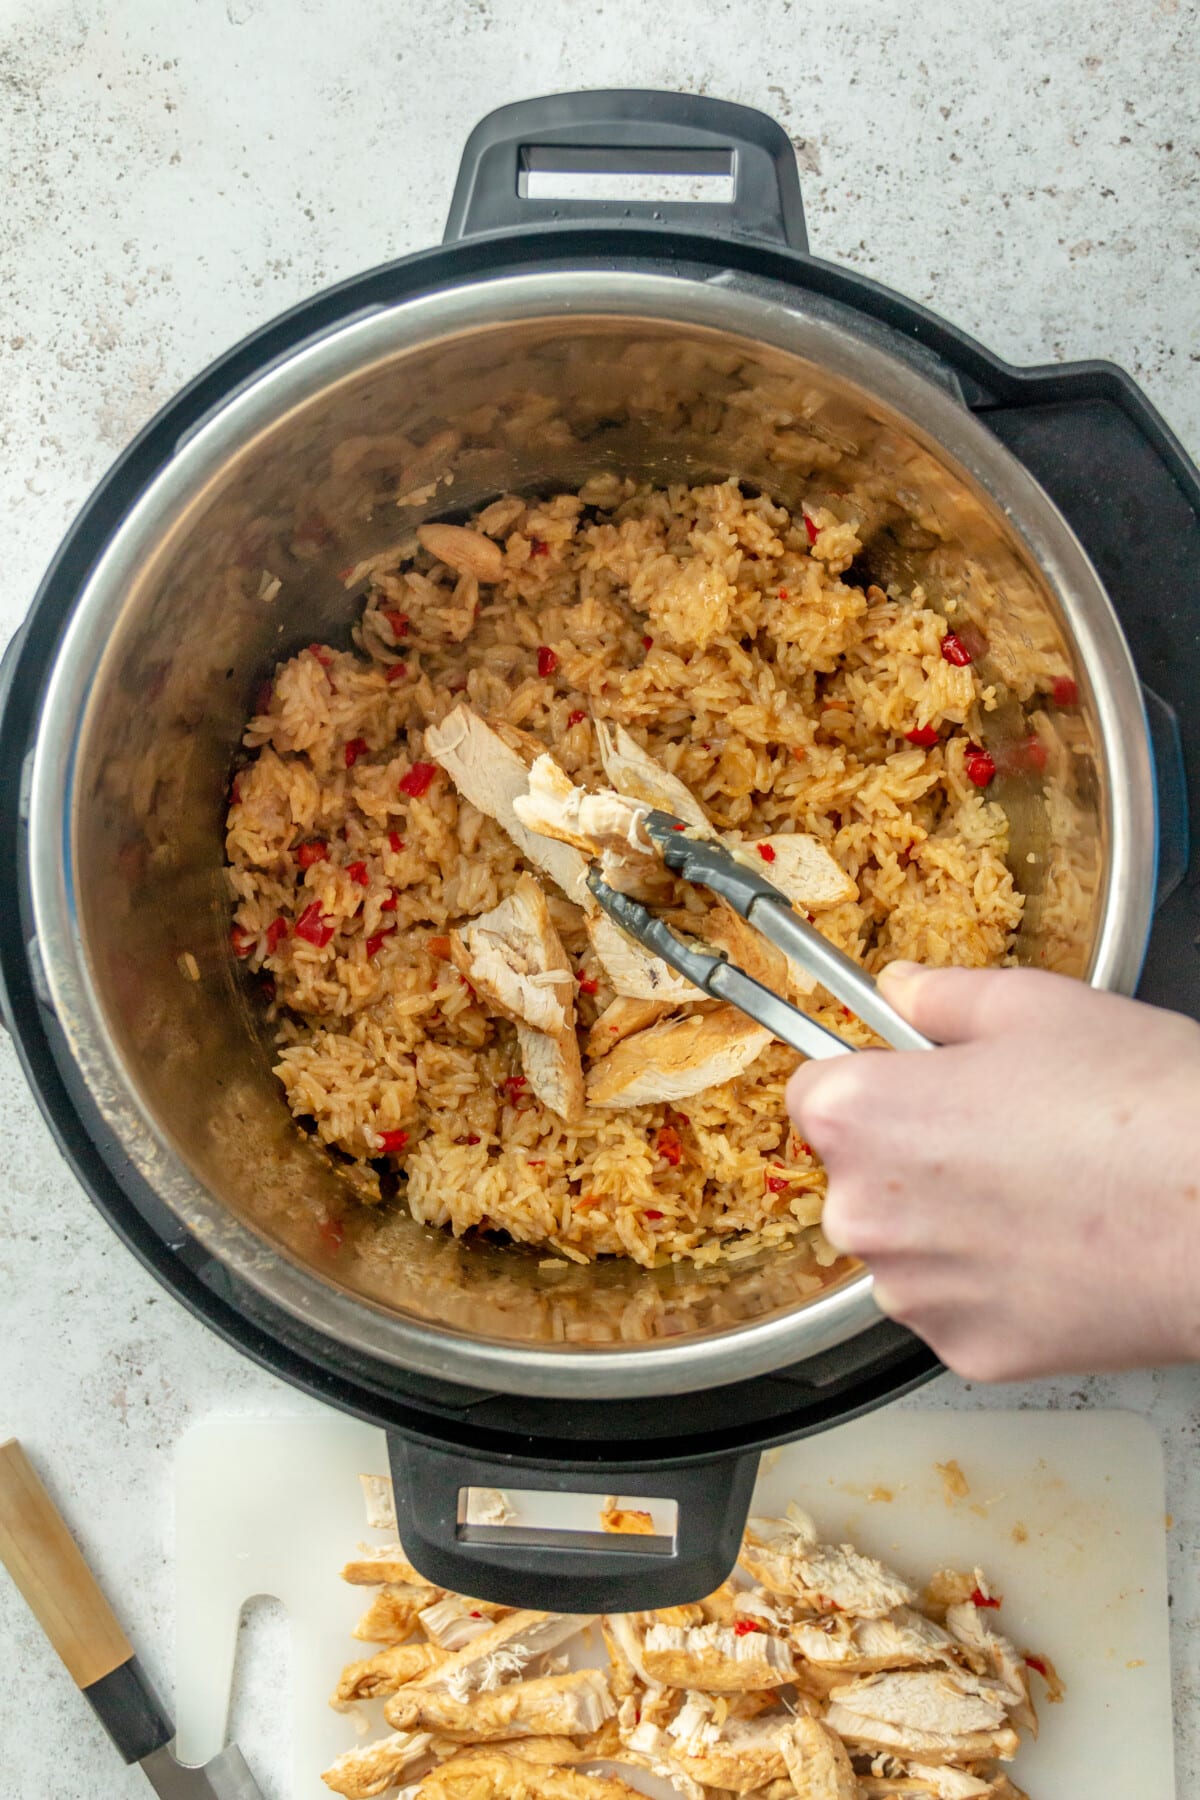 Strips of cooked chicken are shown being placed into an instant pot which holds a variety of other ingredients.